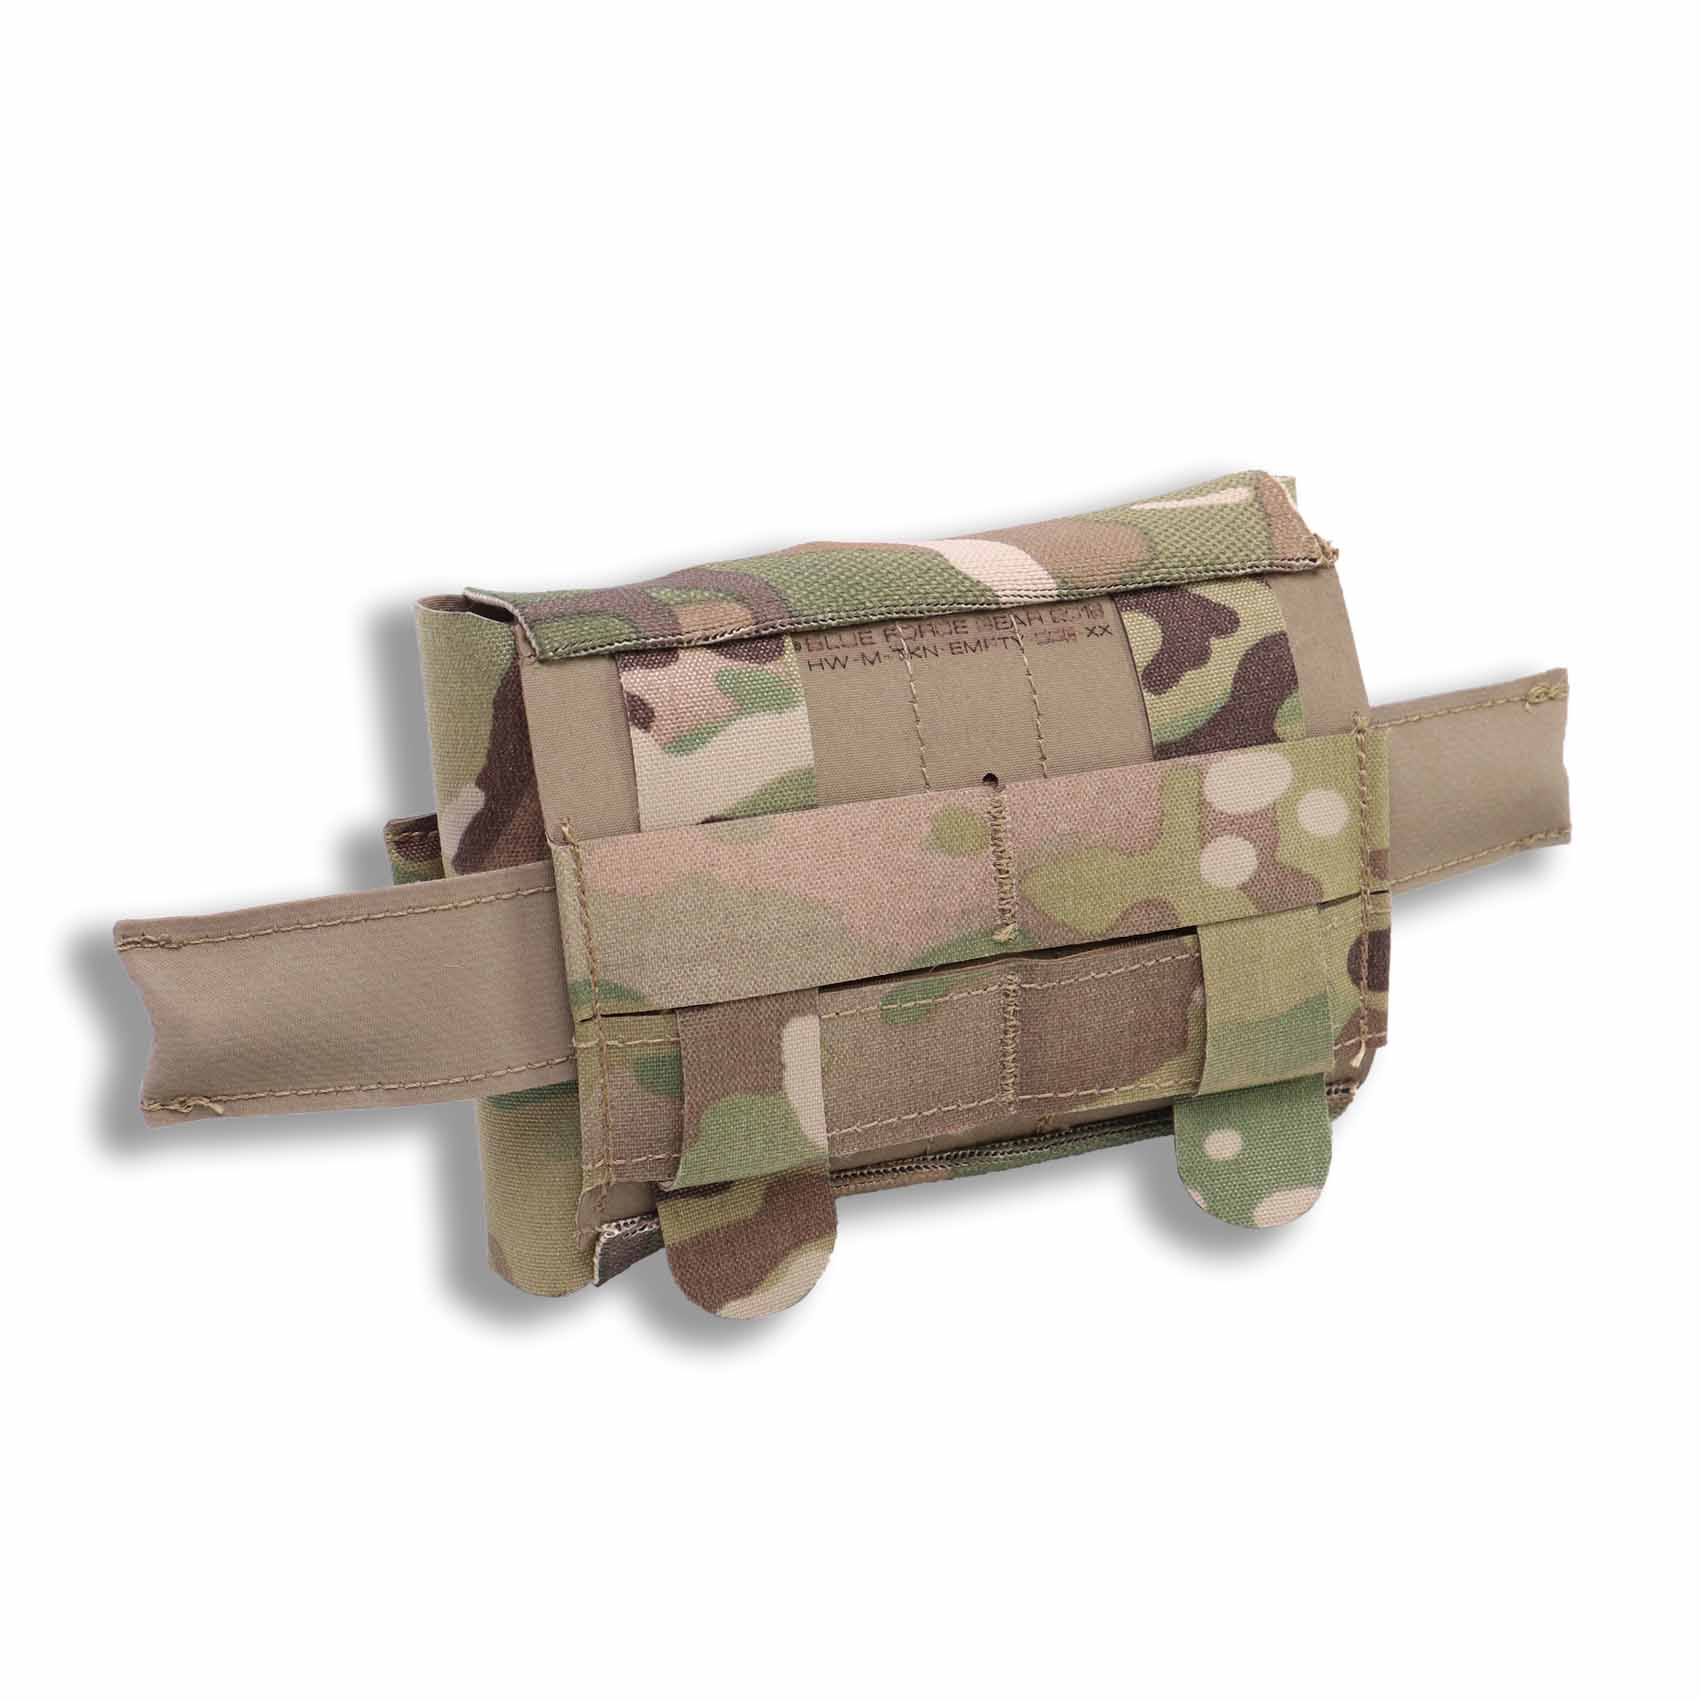 Blue Force Gear MICRO Trauma Kit NOW! Medical Pouch - MOLLE